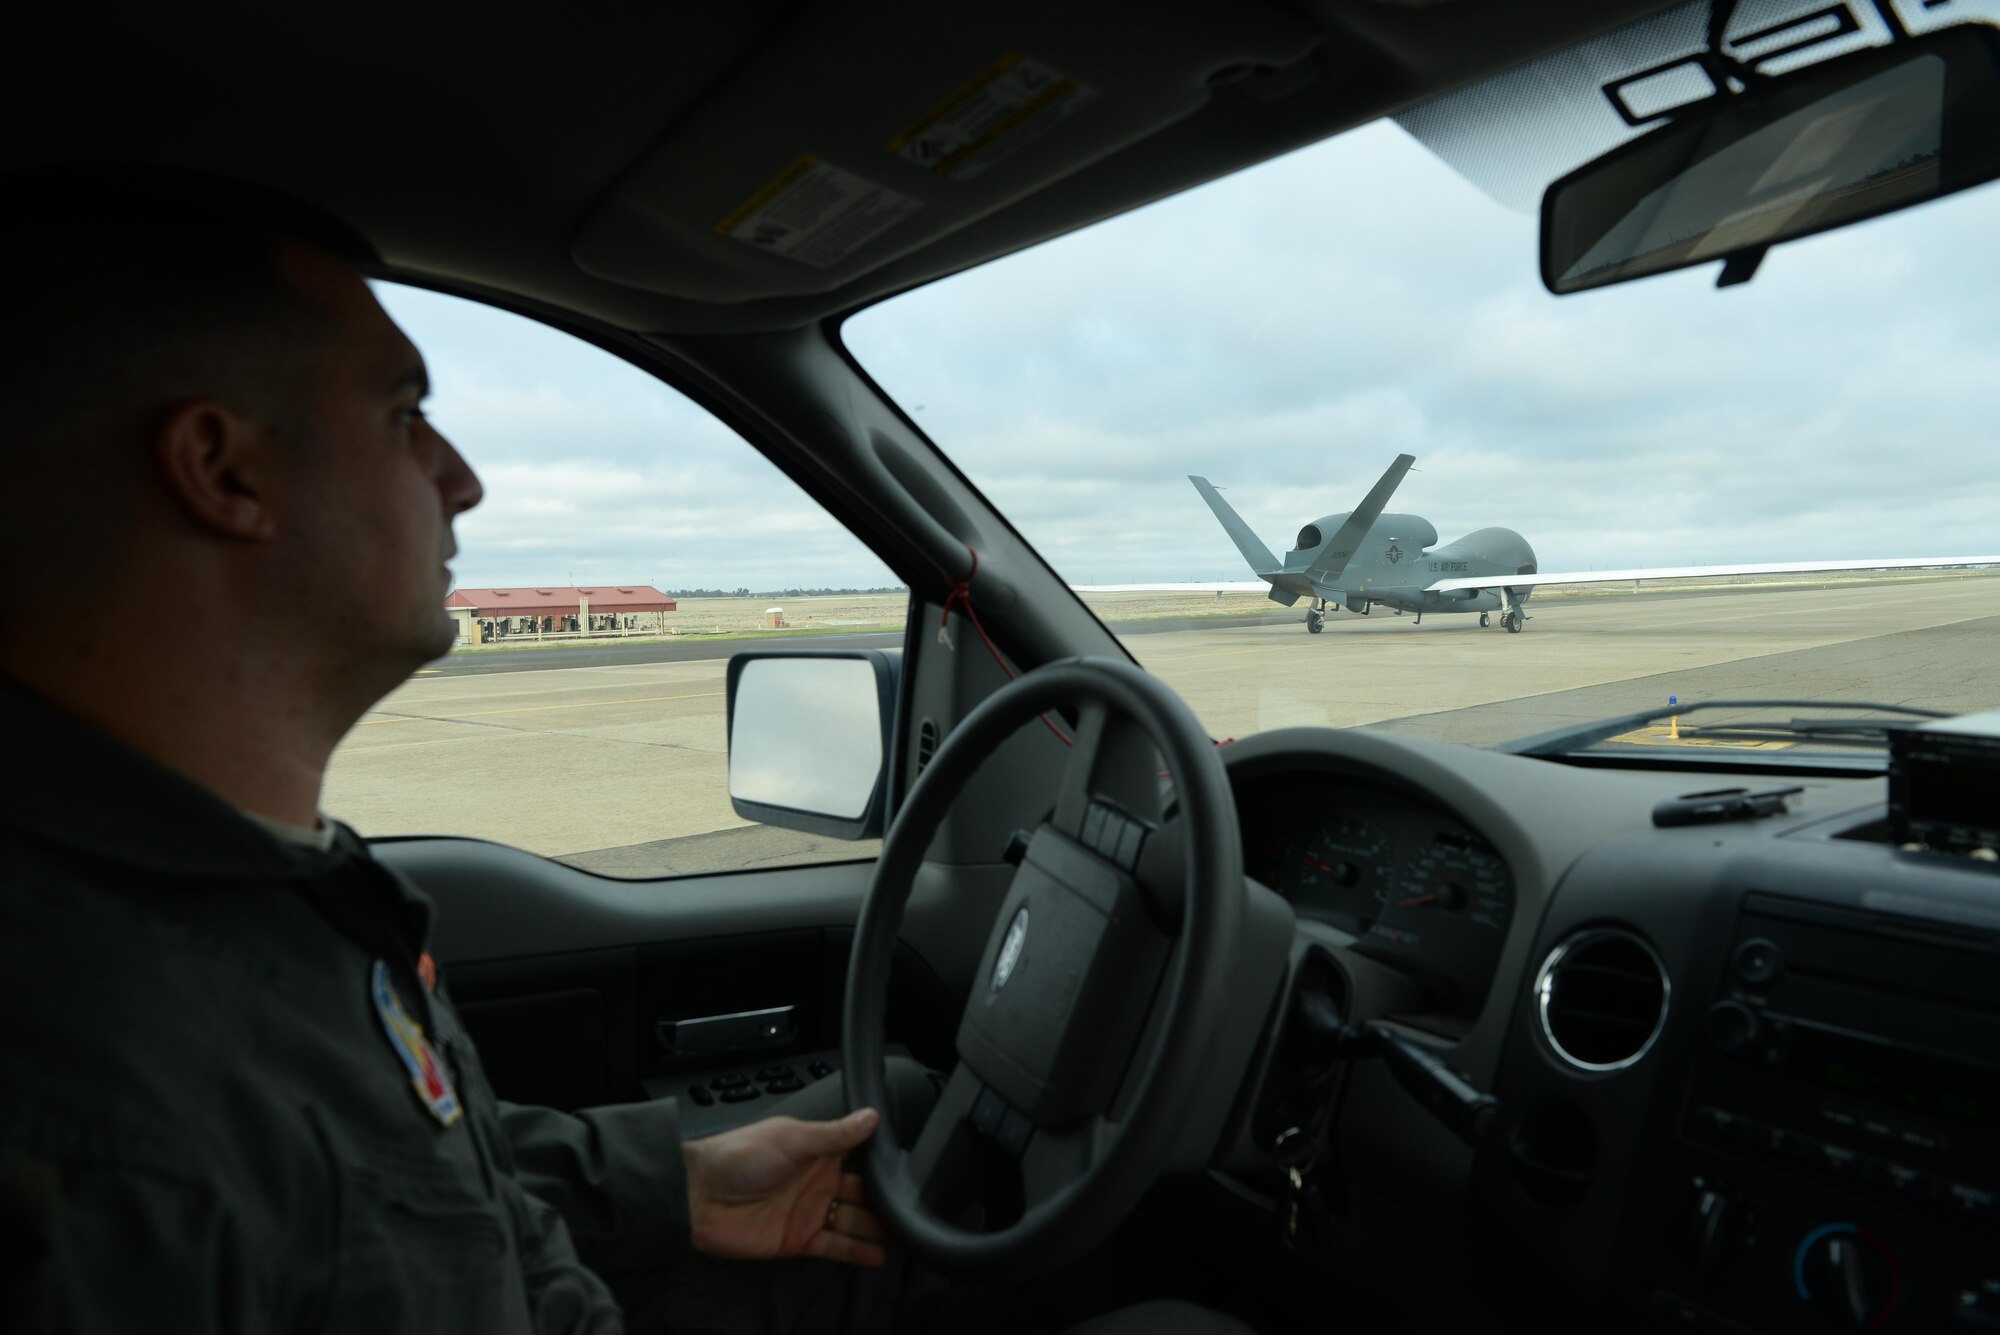 Capt. Thomas, 12th Reconnaissance Squadron RQ-4 Global Hawk pilot, follows a RQ-4 Global Hawk down the taxiway Nov. 1, 2016, at Beale Air Force Base, California. Thomas fulfilled the role of “Hawkeye”. Hawkeye serves as the human eyes and ears for the remotely piloted RQ-4 Global Hawk before flight. (U.S. Air Force photo/Staff Sgt. Bobby Cummings)